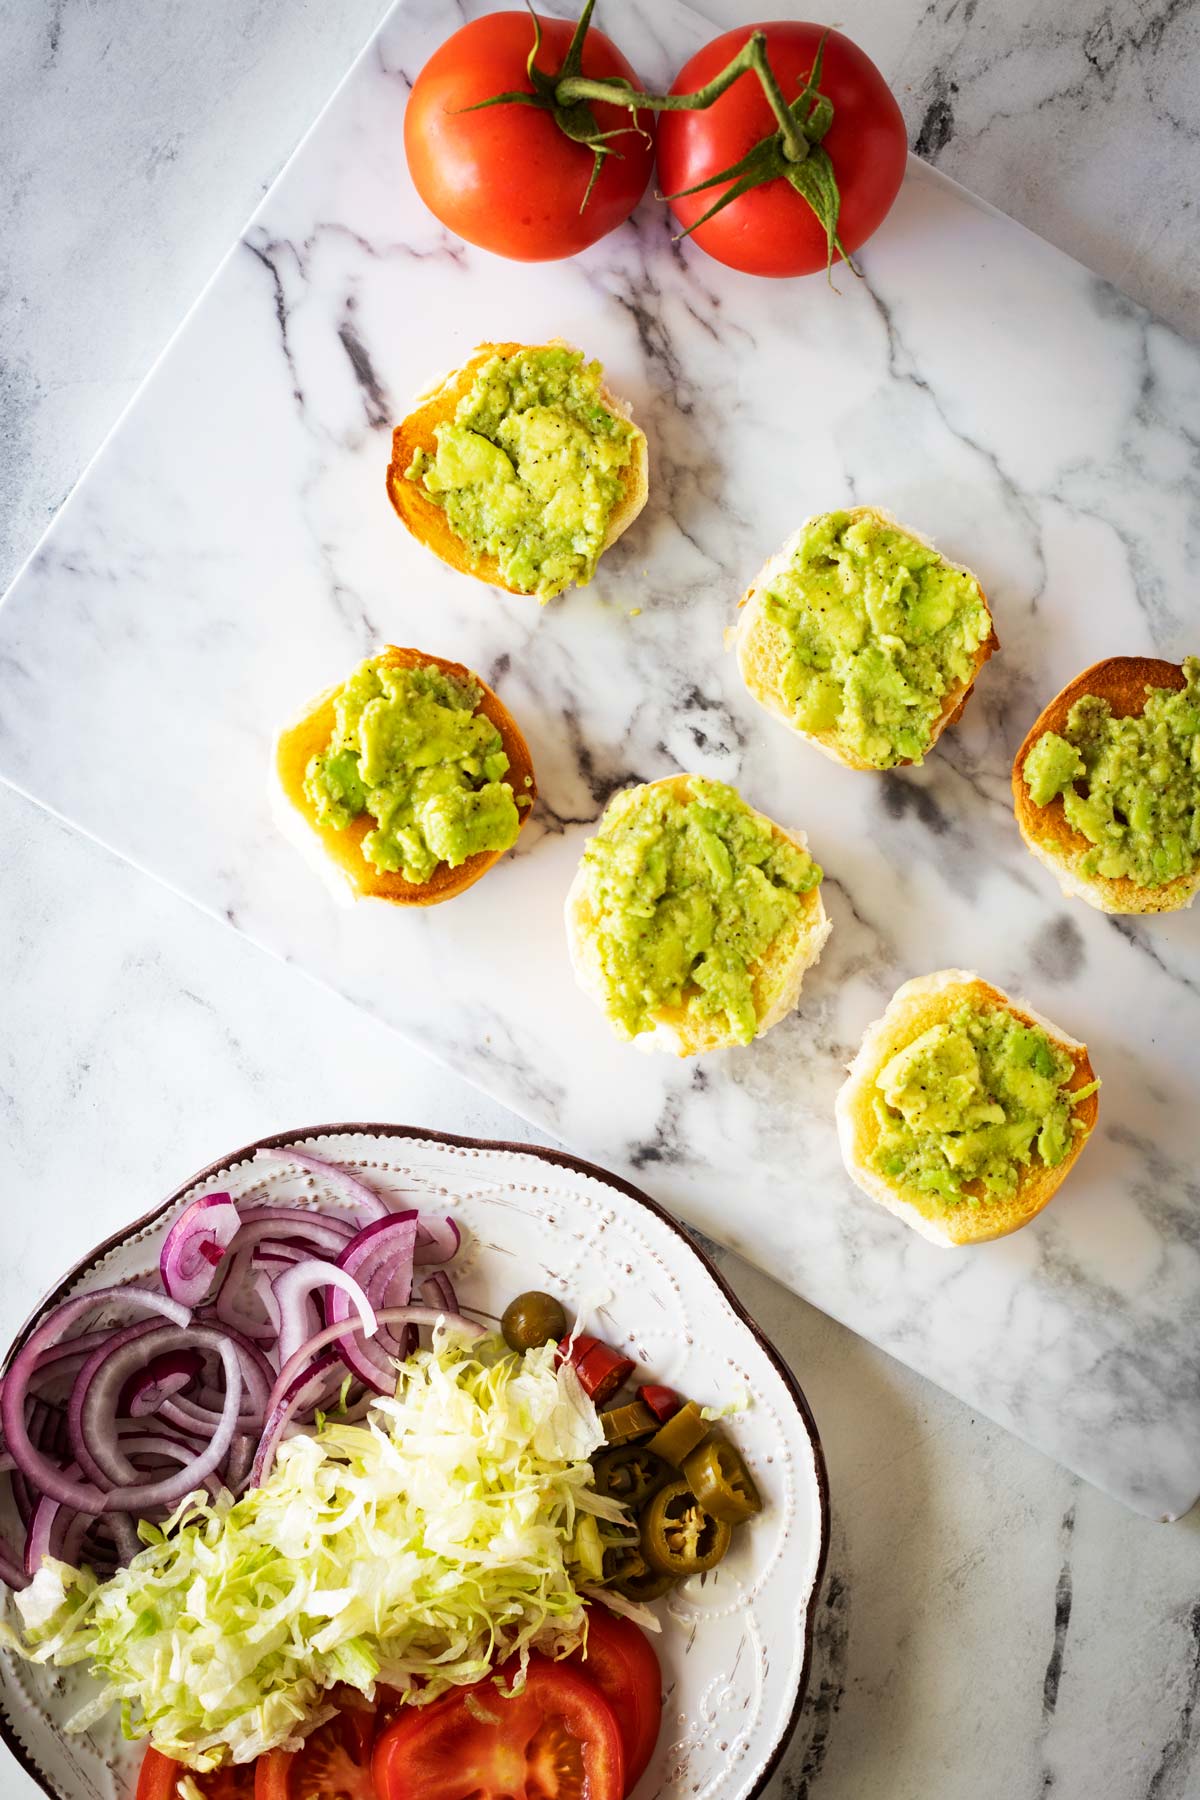 Slider buns topped with mashed avocado.